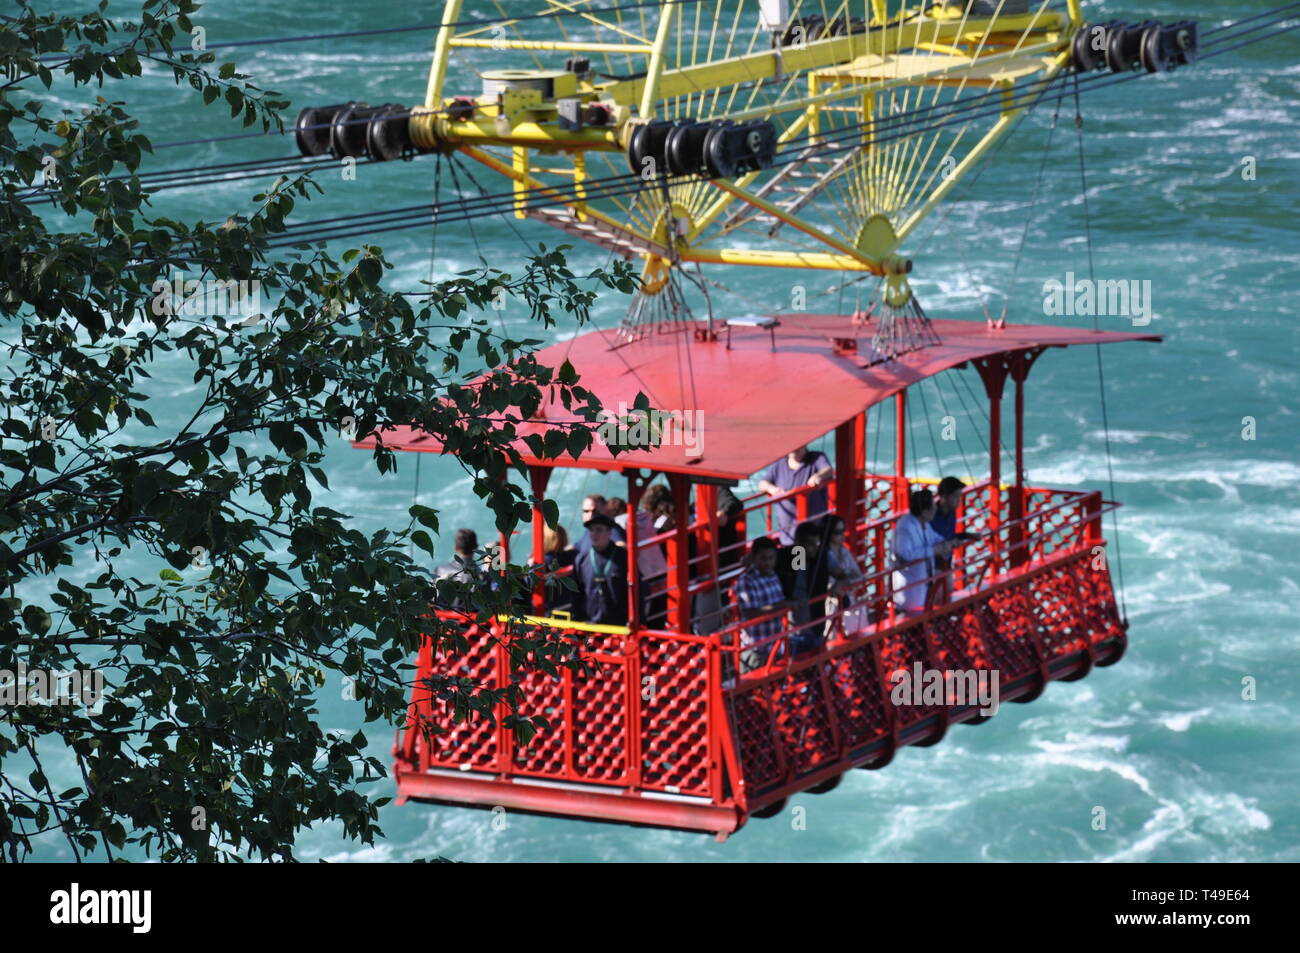 View of the Spanish Aero Car or Cable Car over the Niagara River Whirlpool near Niagara Falls between Canada and the United States Stock Photo